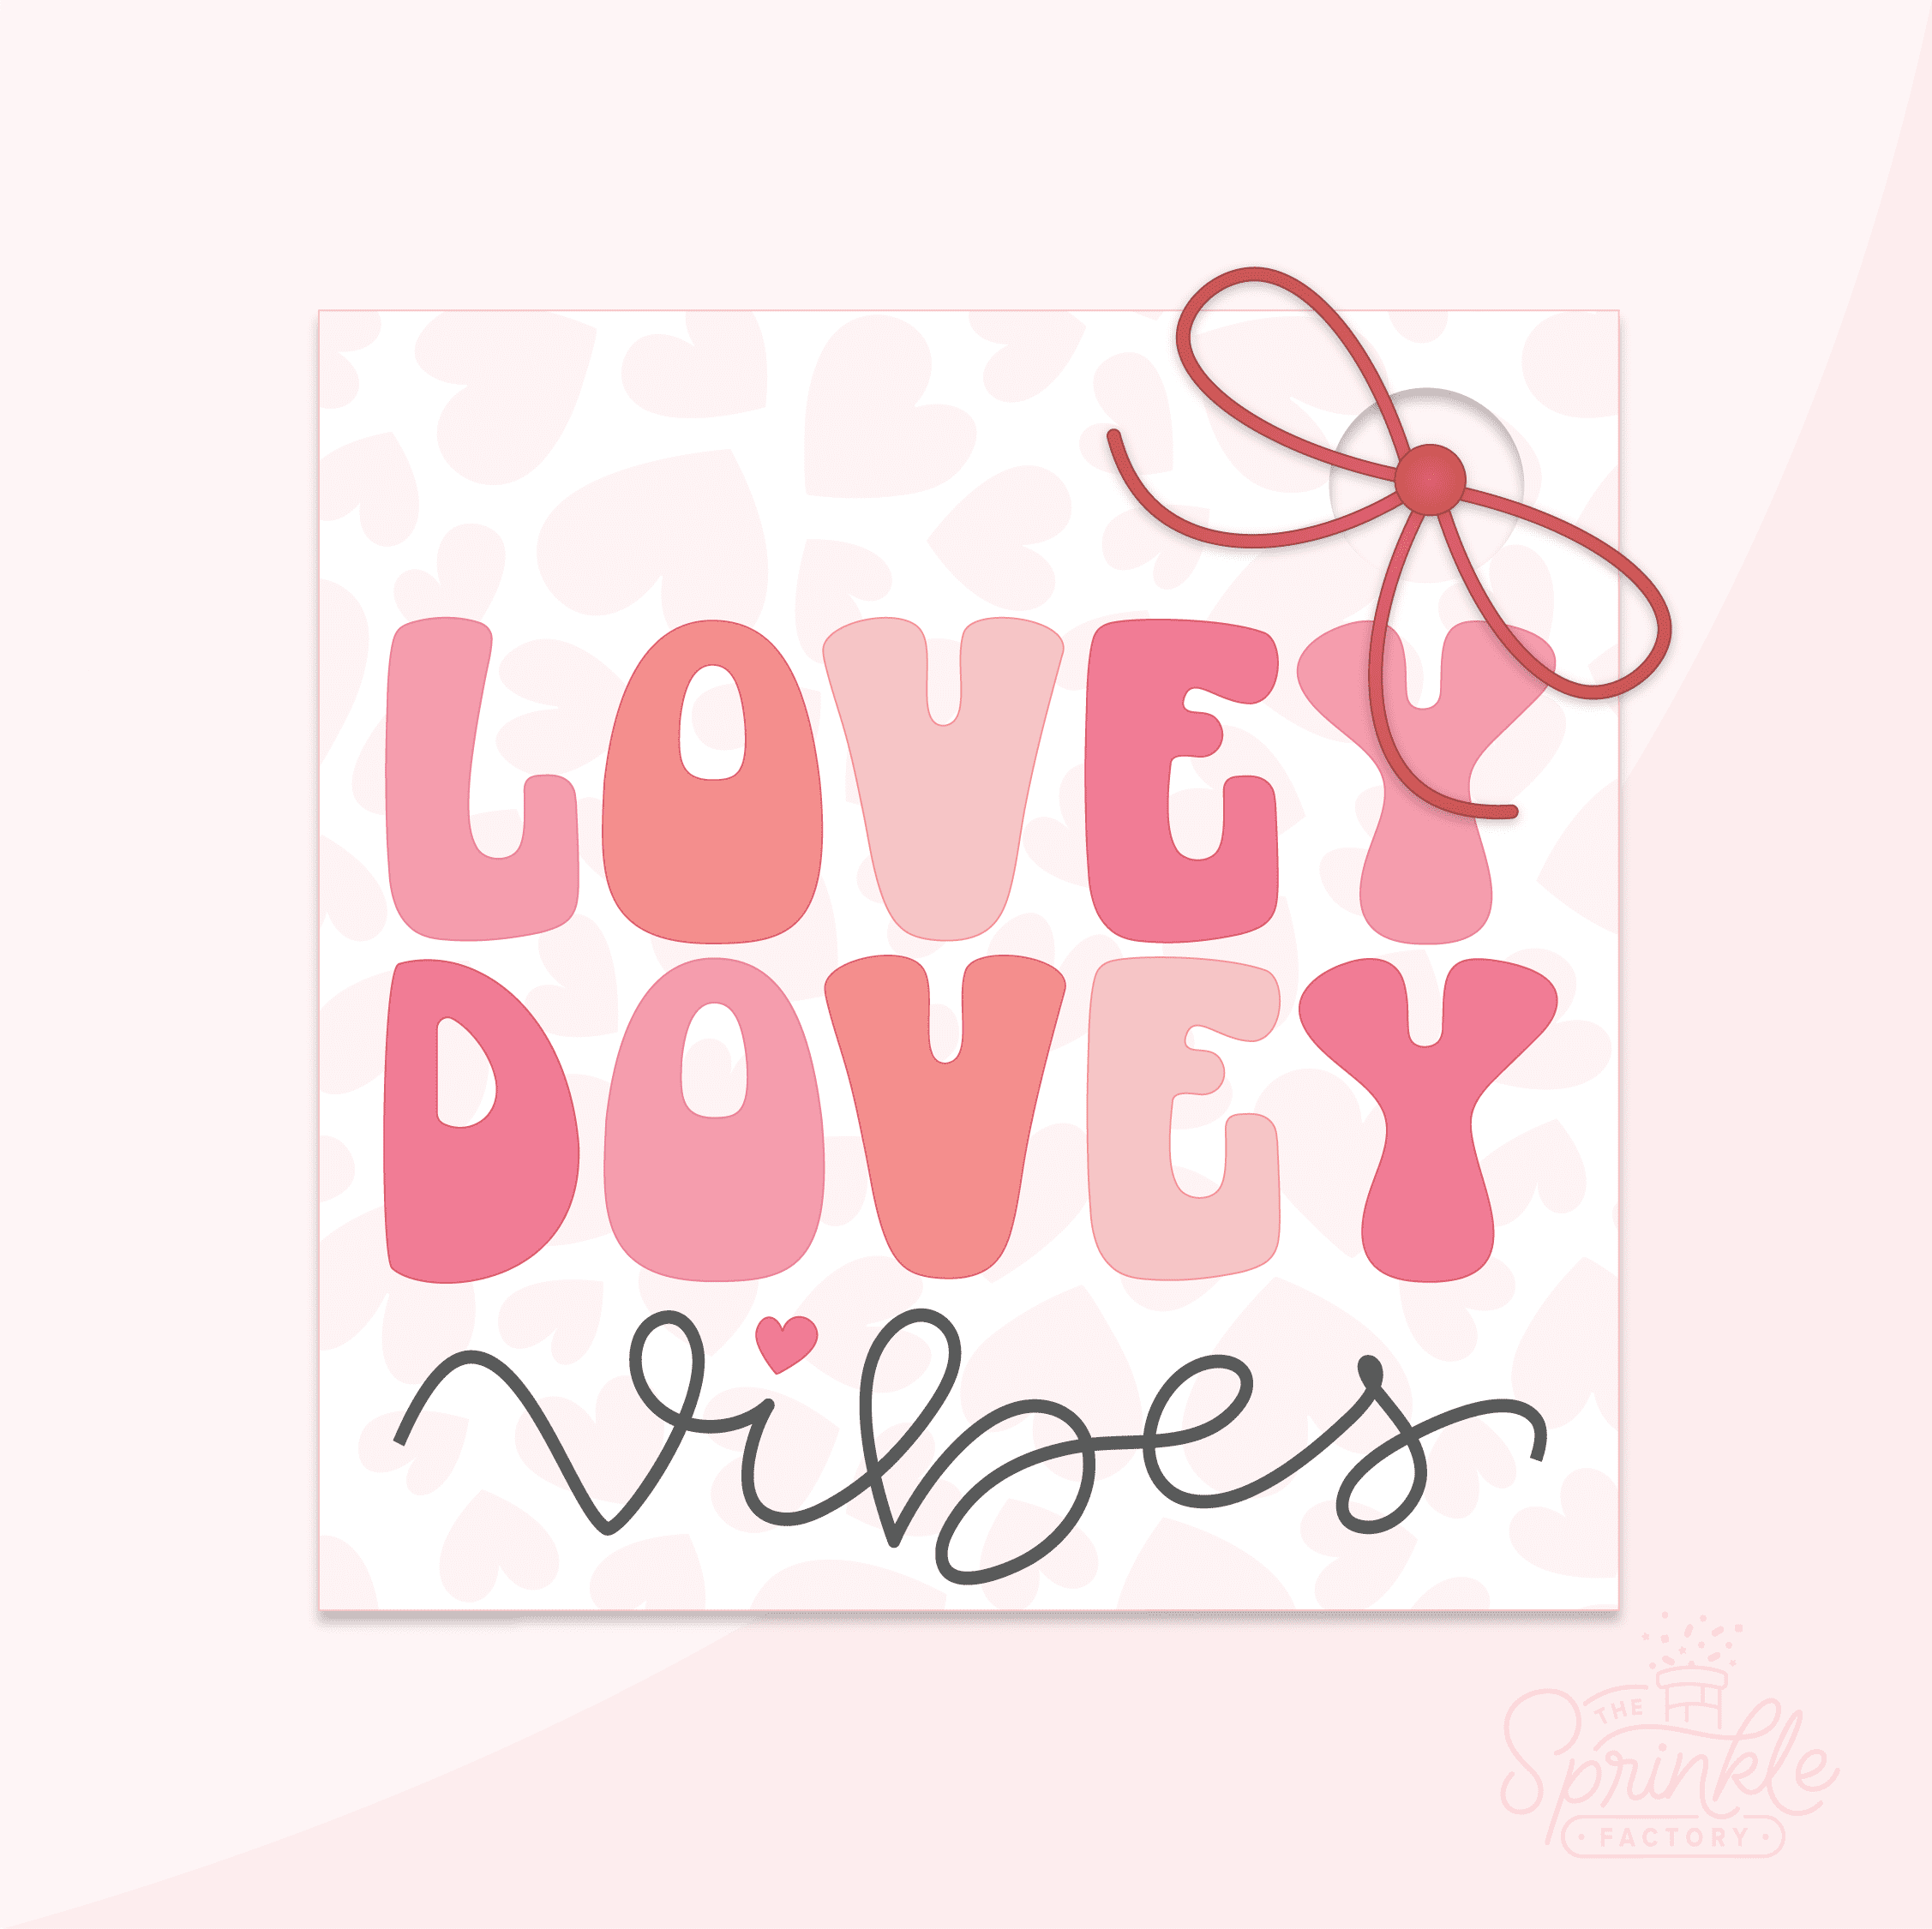 Clipart of a square white tag with a pink heart print on it with a hole for a red bow with LOVEY DOVEY written on it in alternating pink shades and vibes written below in black cursive lettering.